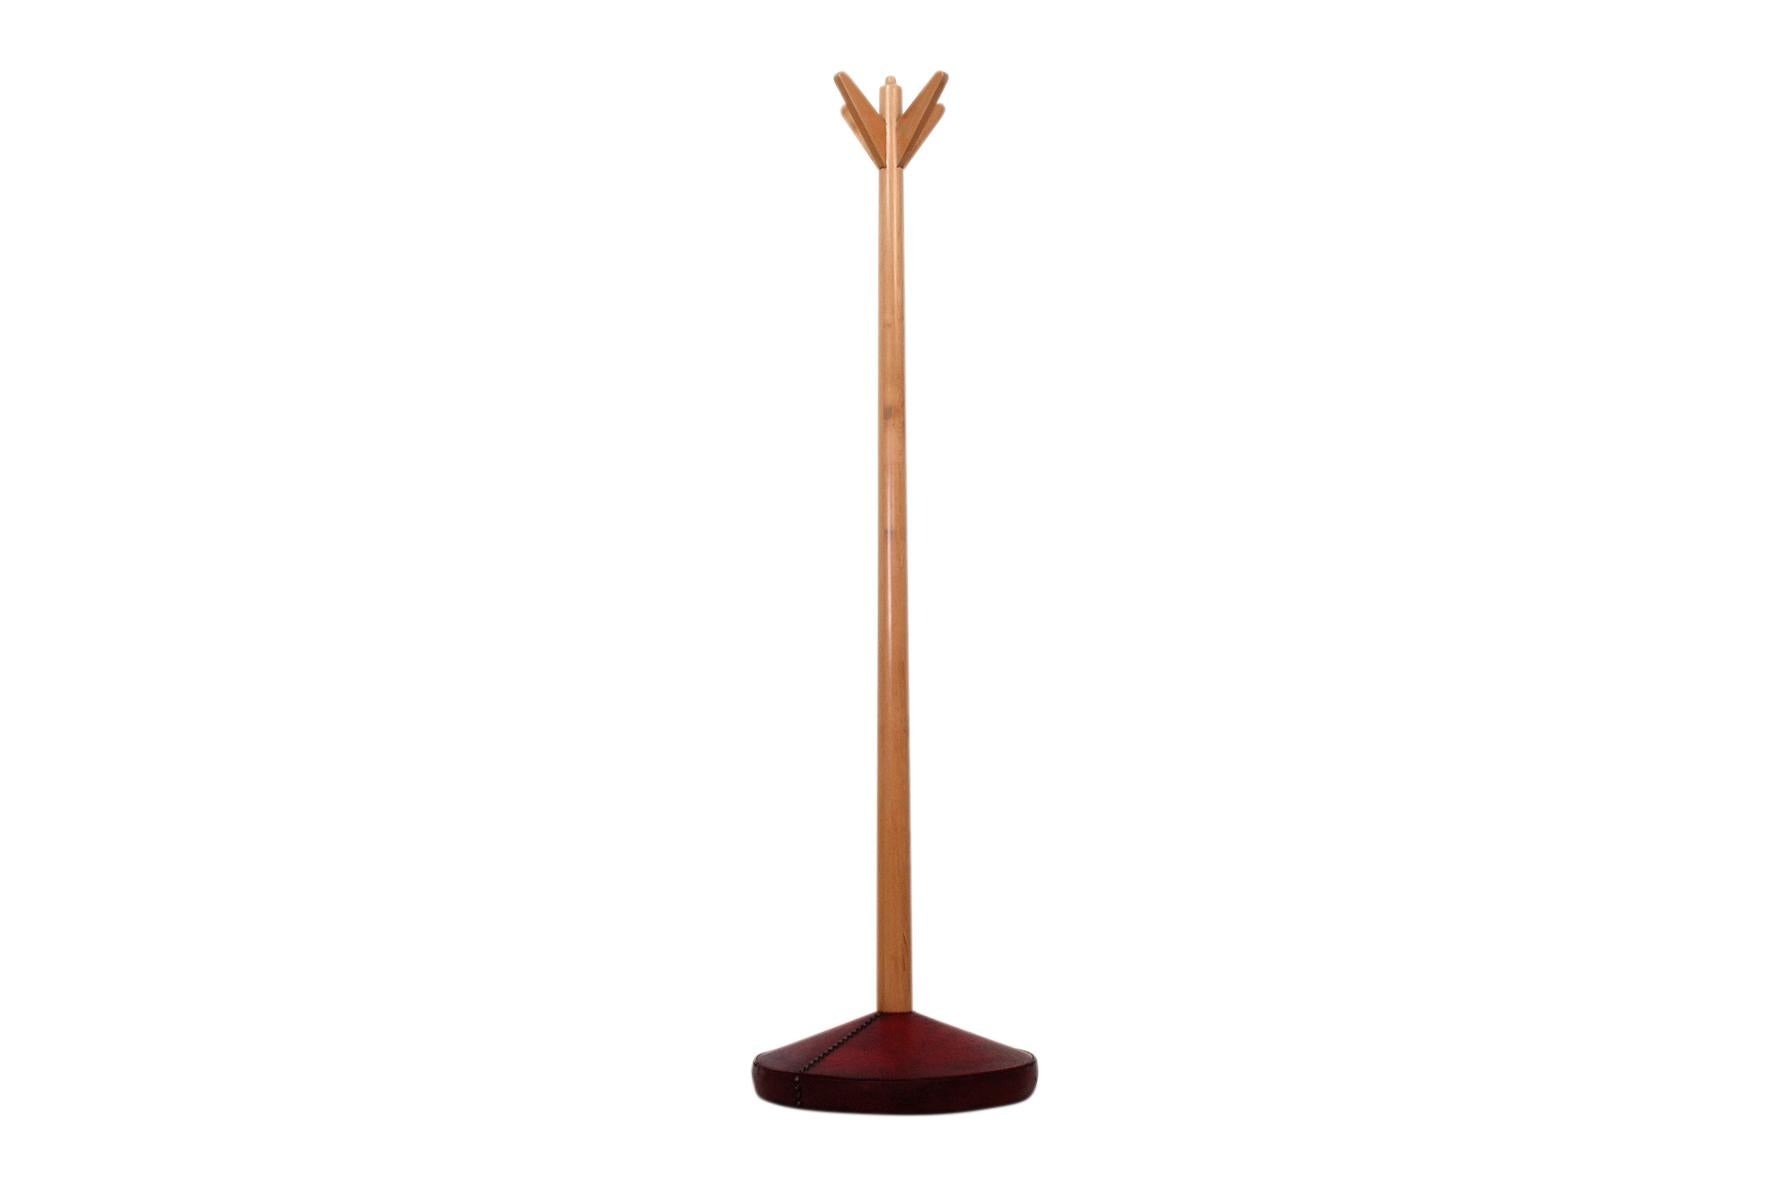 Paldao coat rack by Gilbert Rohde for Herman Miller. Original studded leather base with turned wooden column, circa 1941.